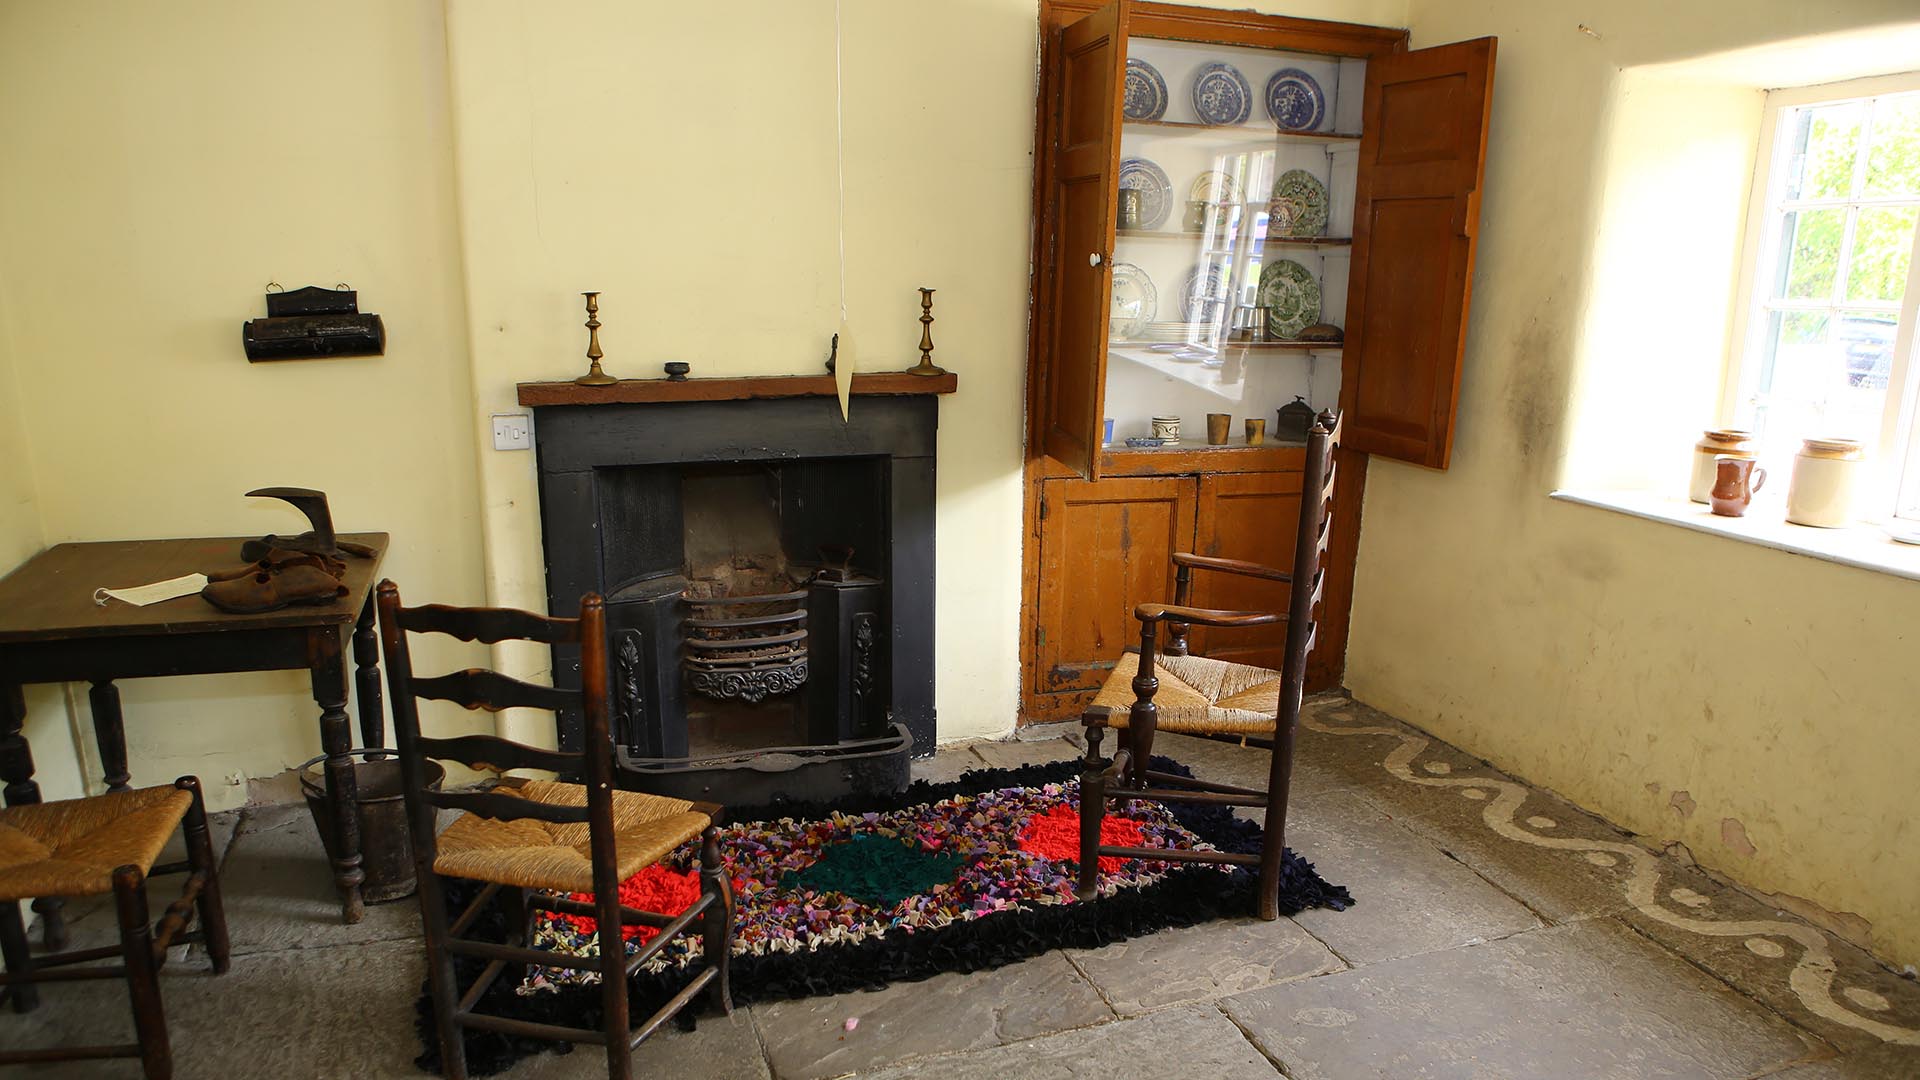 In a room with an open fire grate, two wooden ladderback chairs with woven rush seating stand by a pegged hearthside rug on a stone flagged floor. Alcove cupboards off to one side display antique china crockery. 